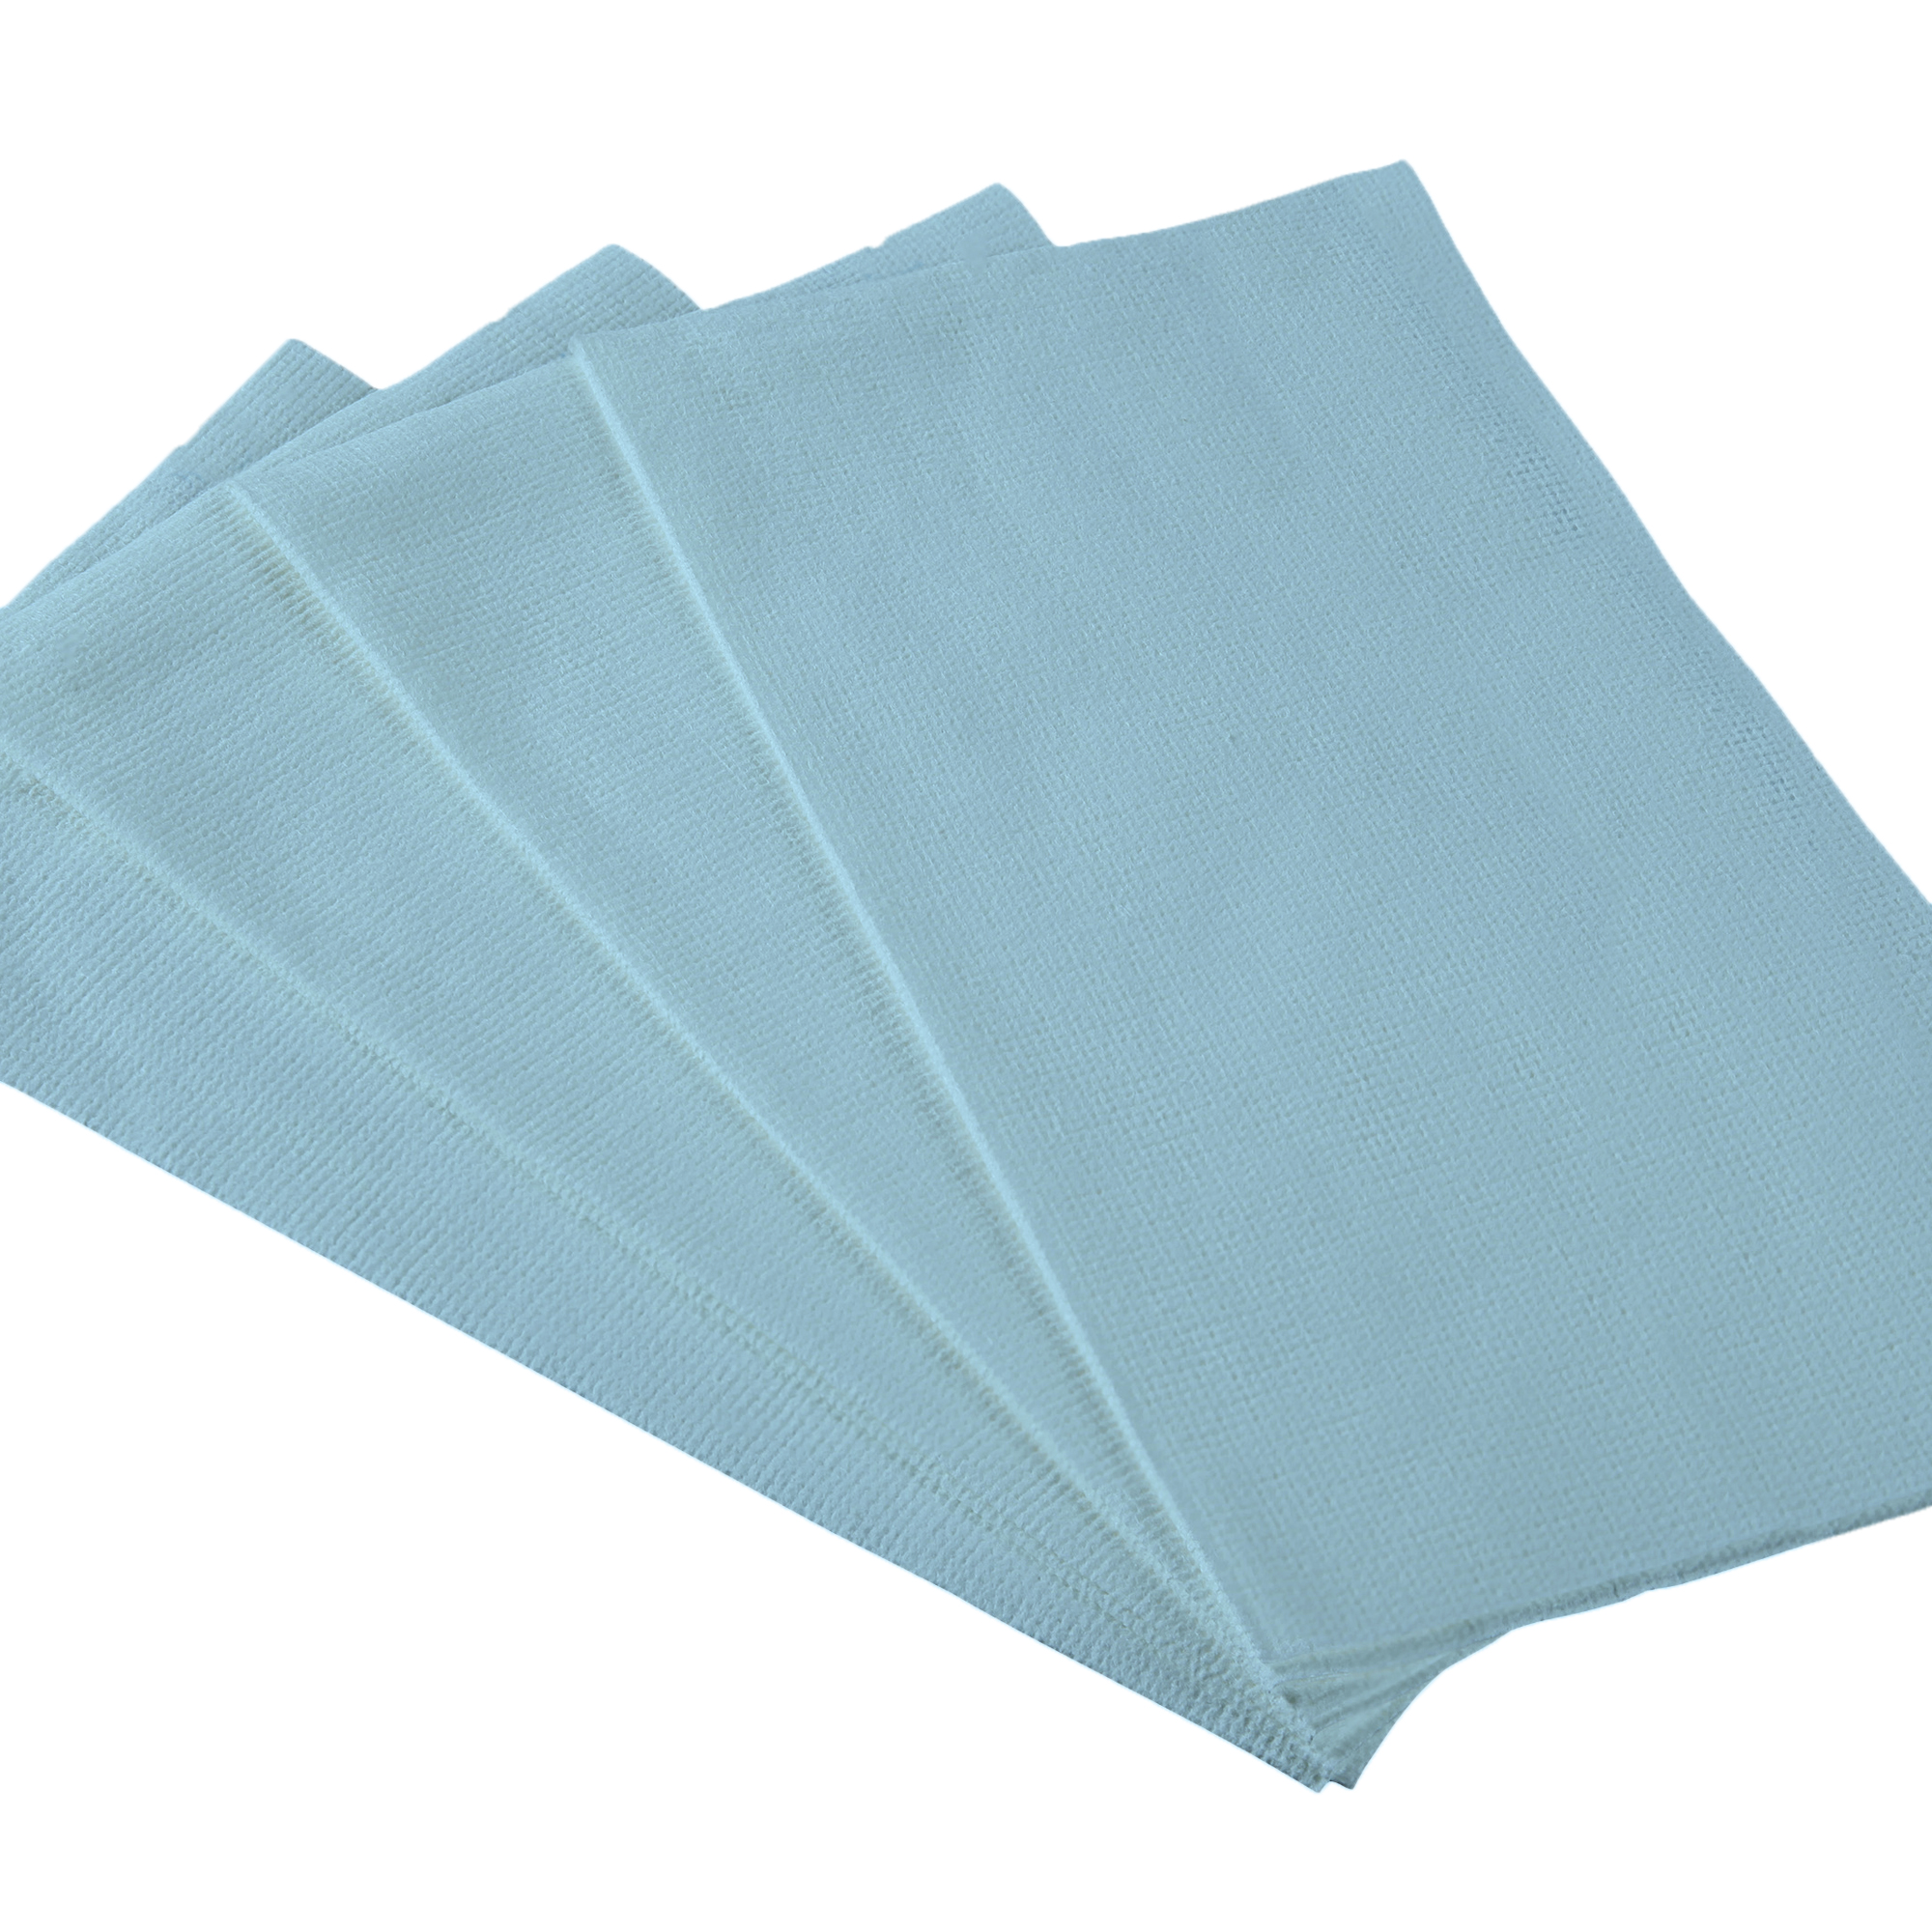 Picture of Foodservice Towels, Kimberly-Clark X70 , 1/4 Fold, 12 1/2 x 23 1/2, Blue, 300/Carton